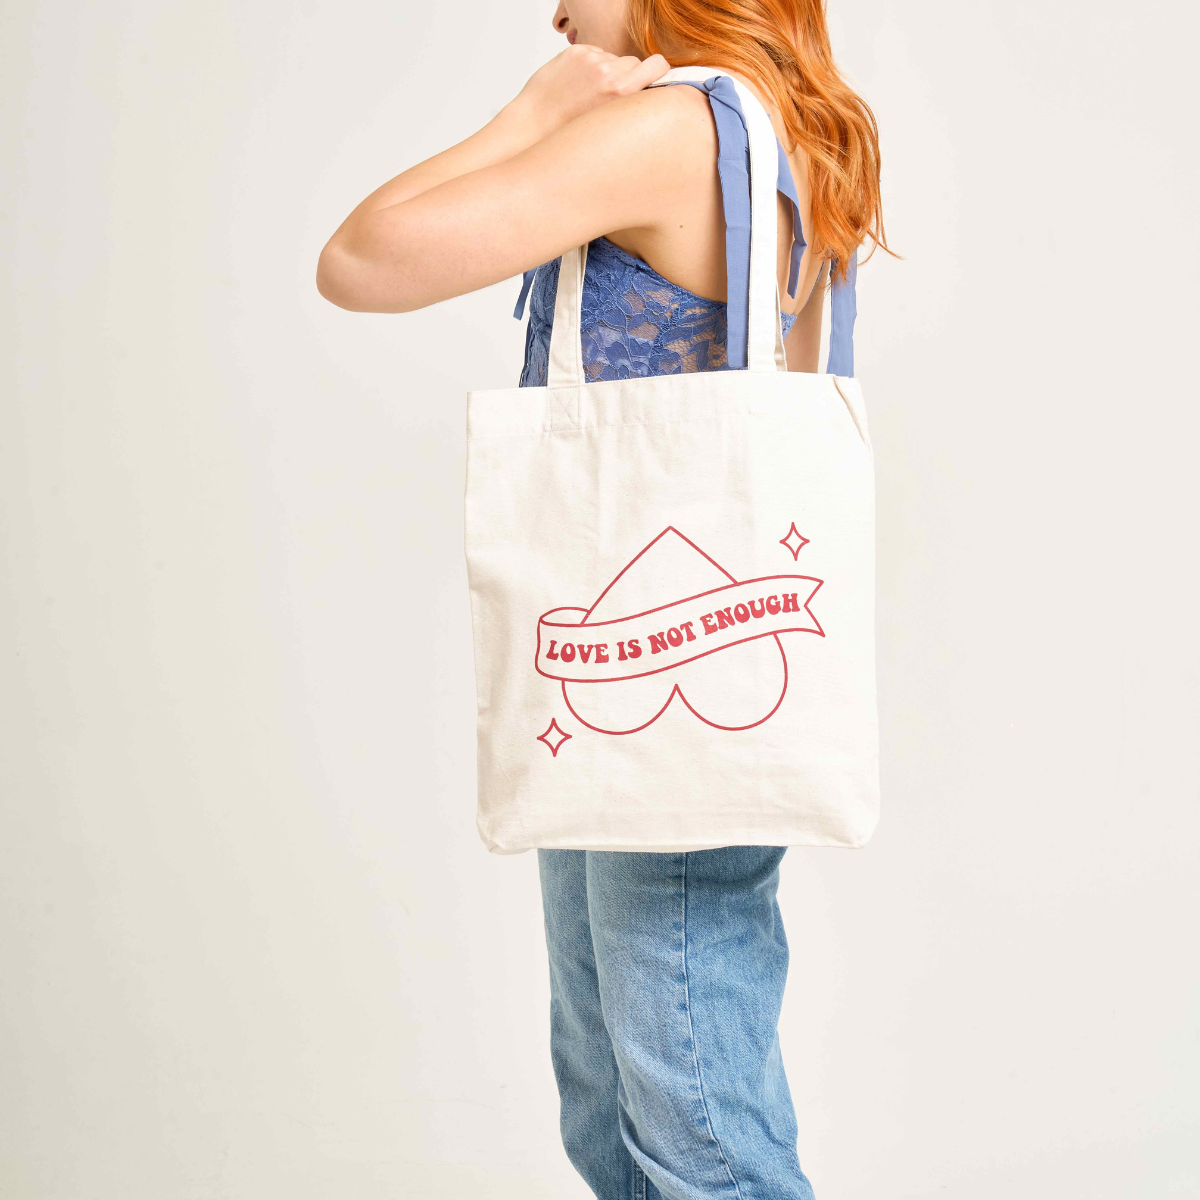 A-MORE Love Is Not Enough - Tote Bag